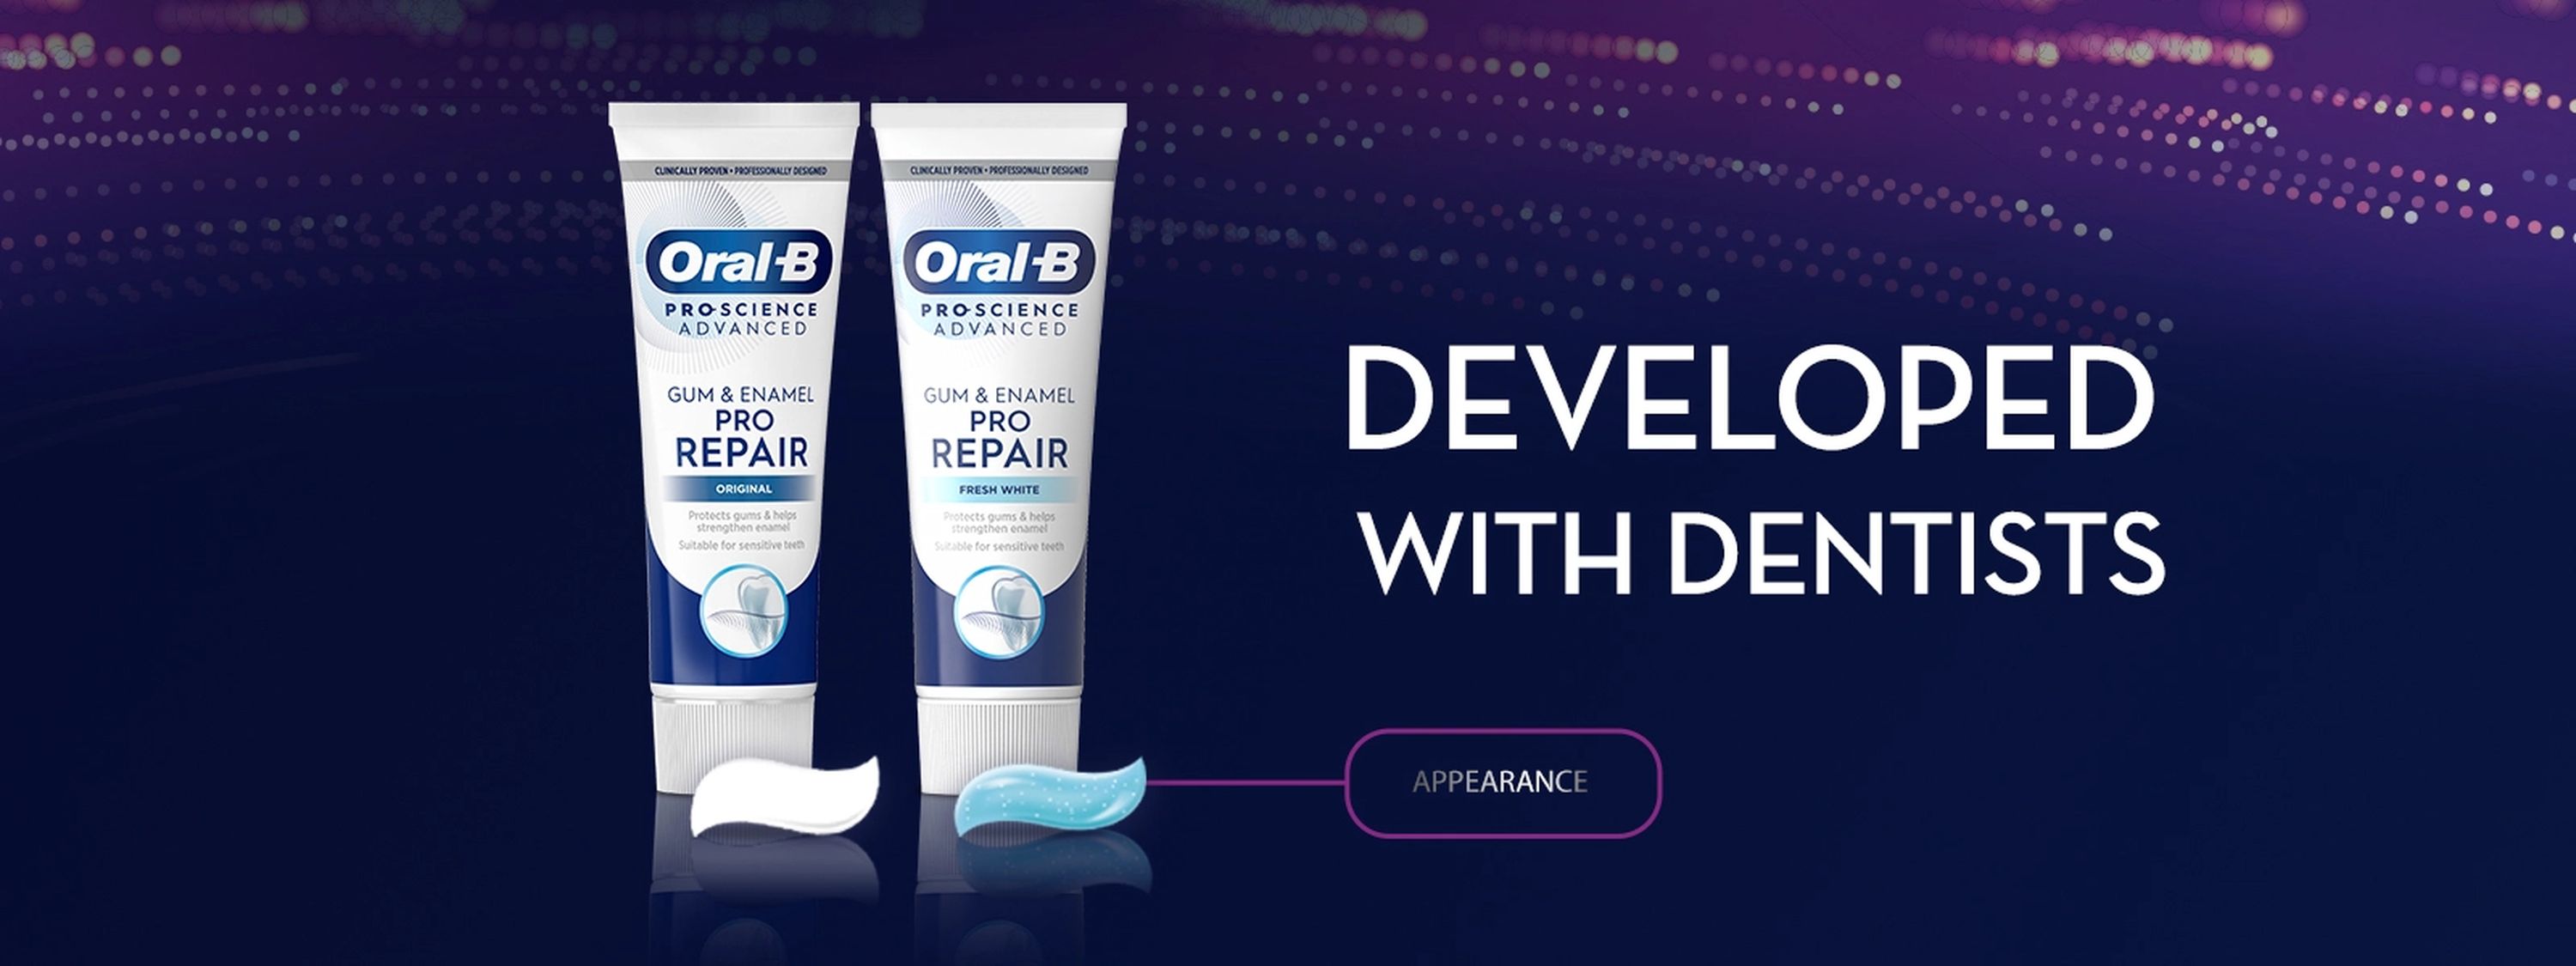 developed with dentists.